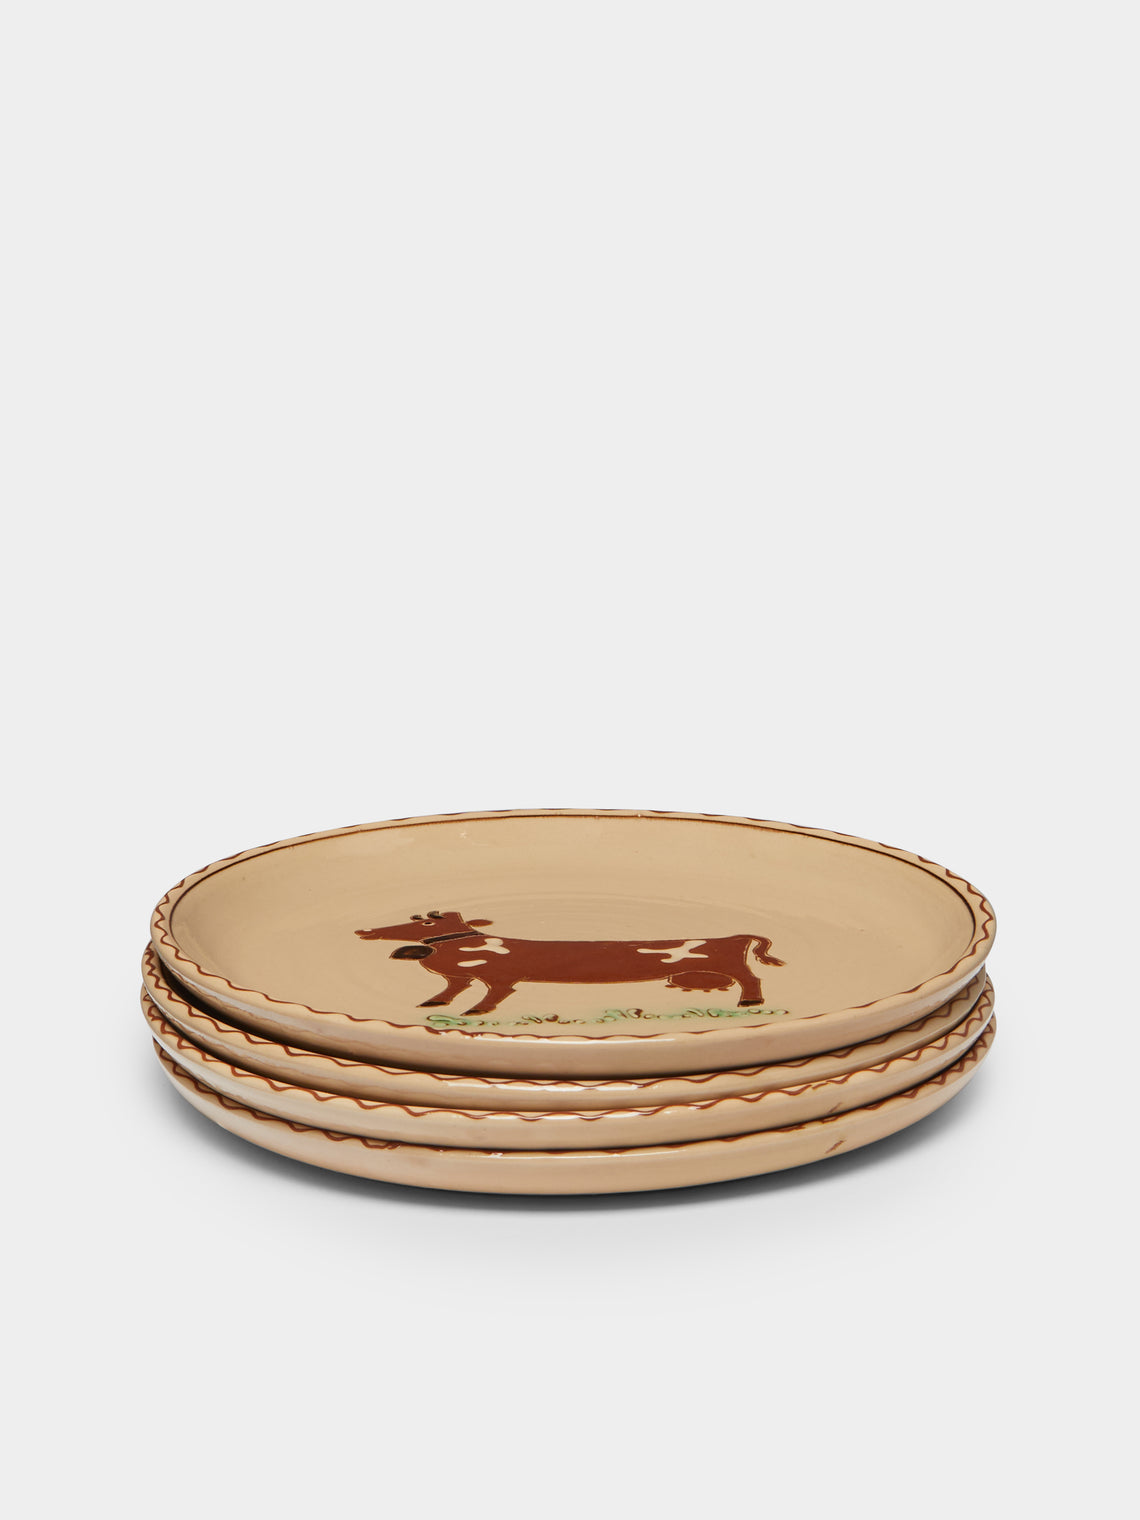 Poterie d’Évires - Cows Hand-Painted Ceramic Dinner Plates (Set of 4) -  - ABASK